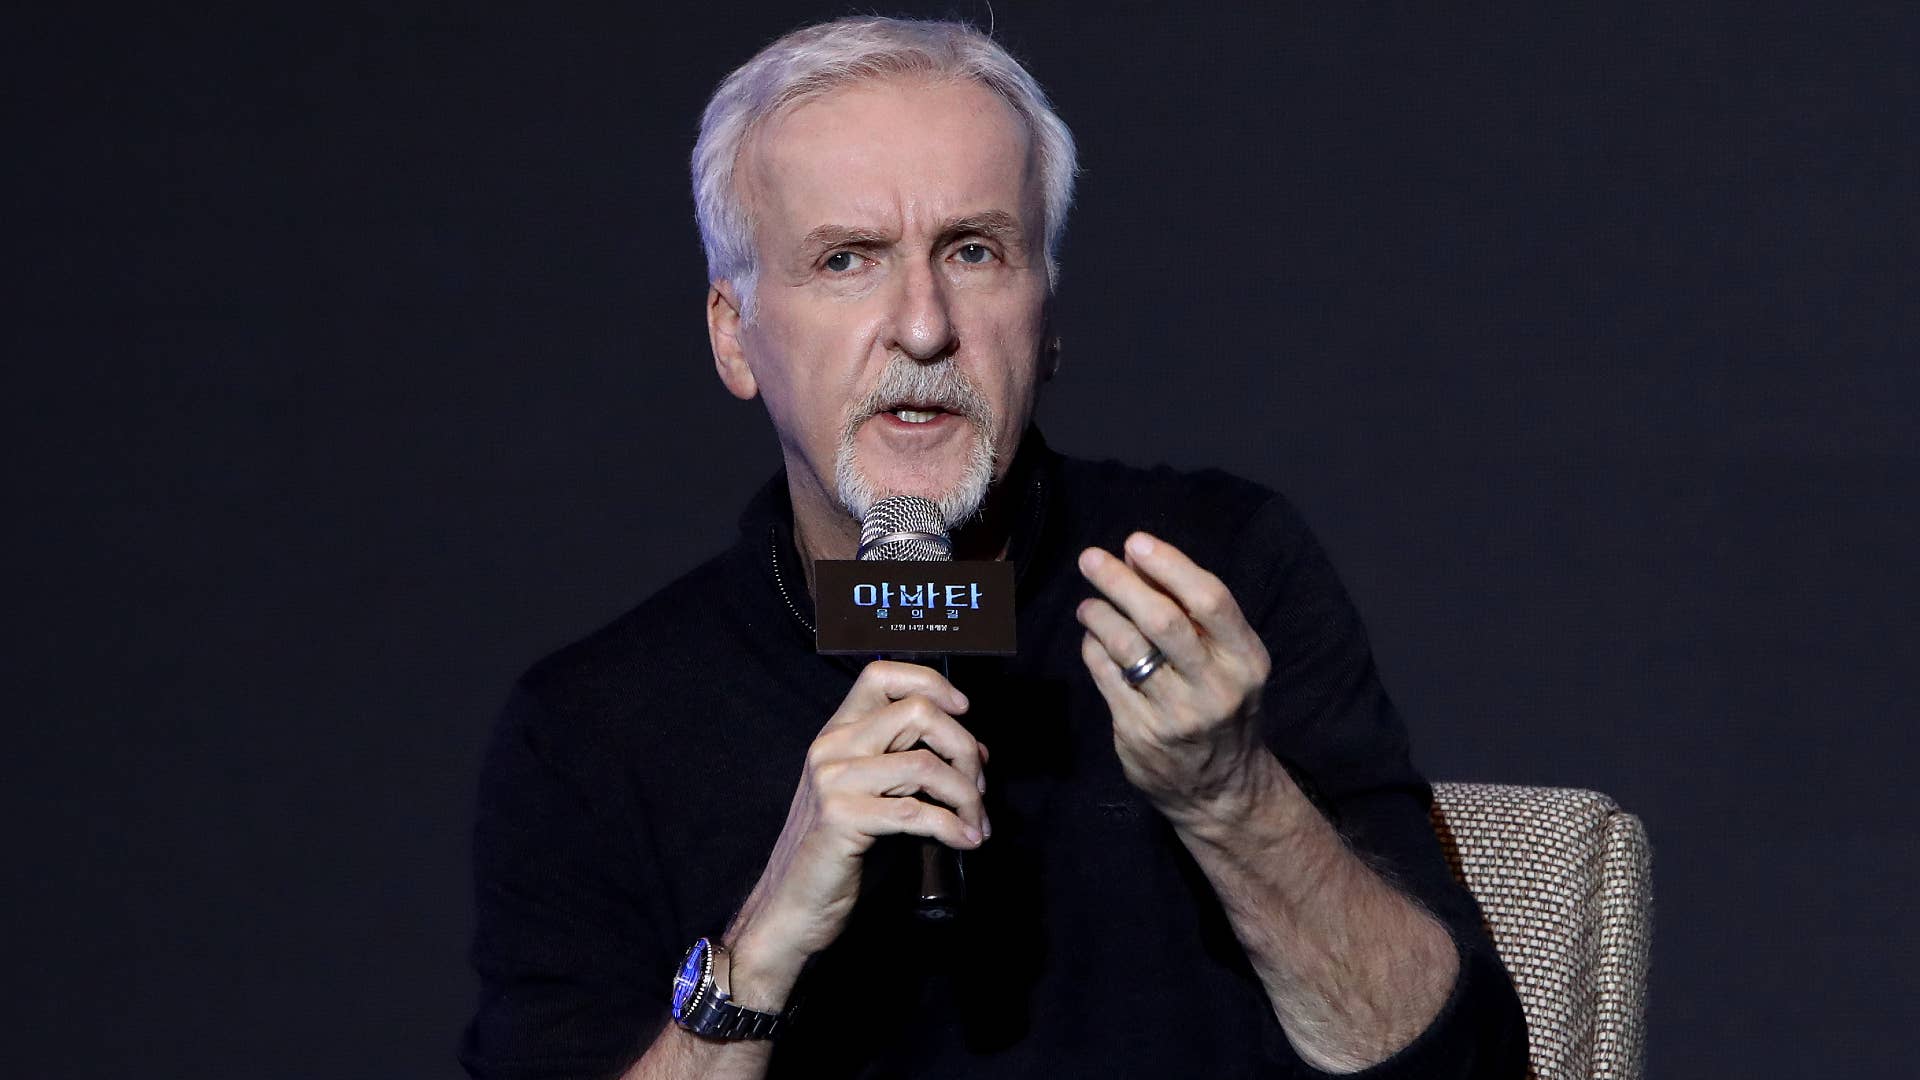 James Cameron is seen speaking at a press event